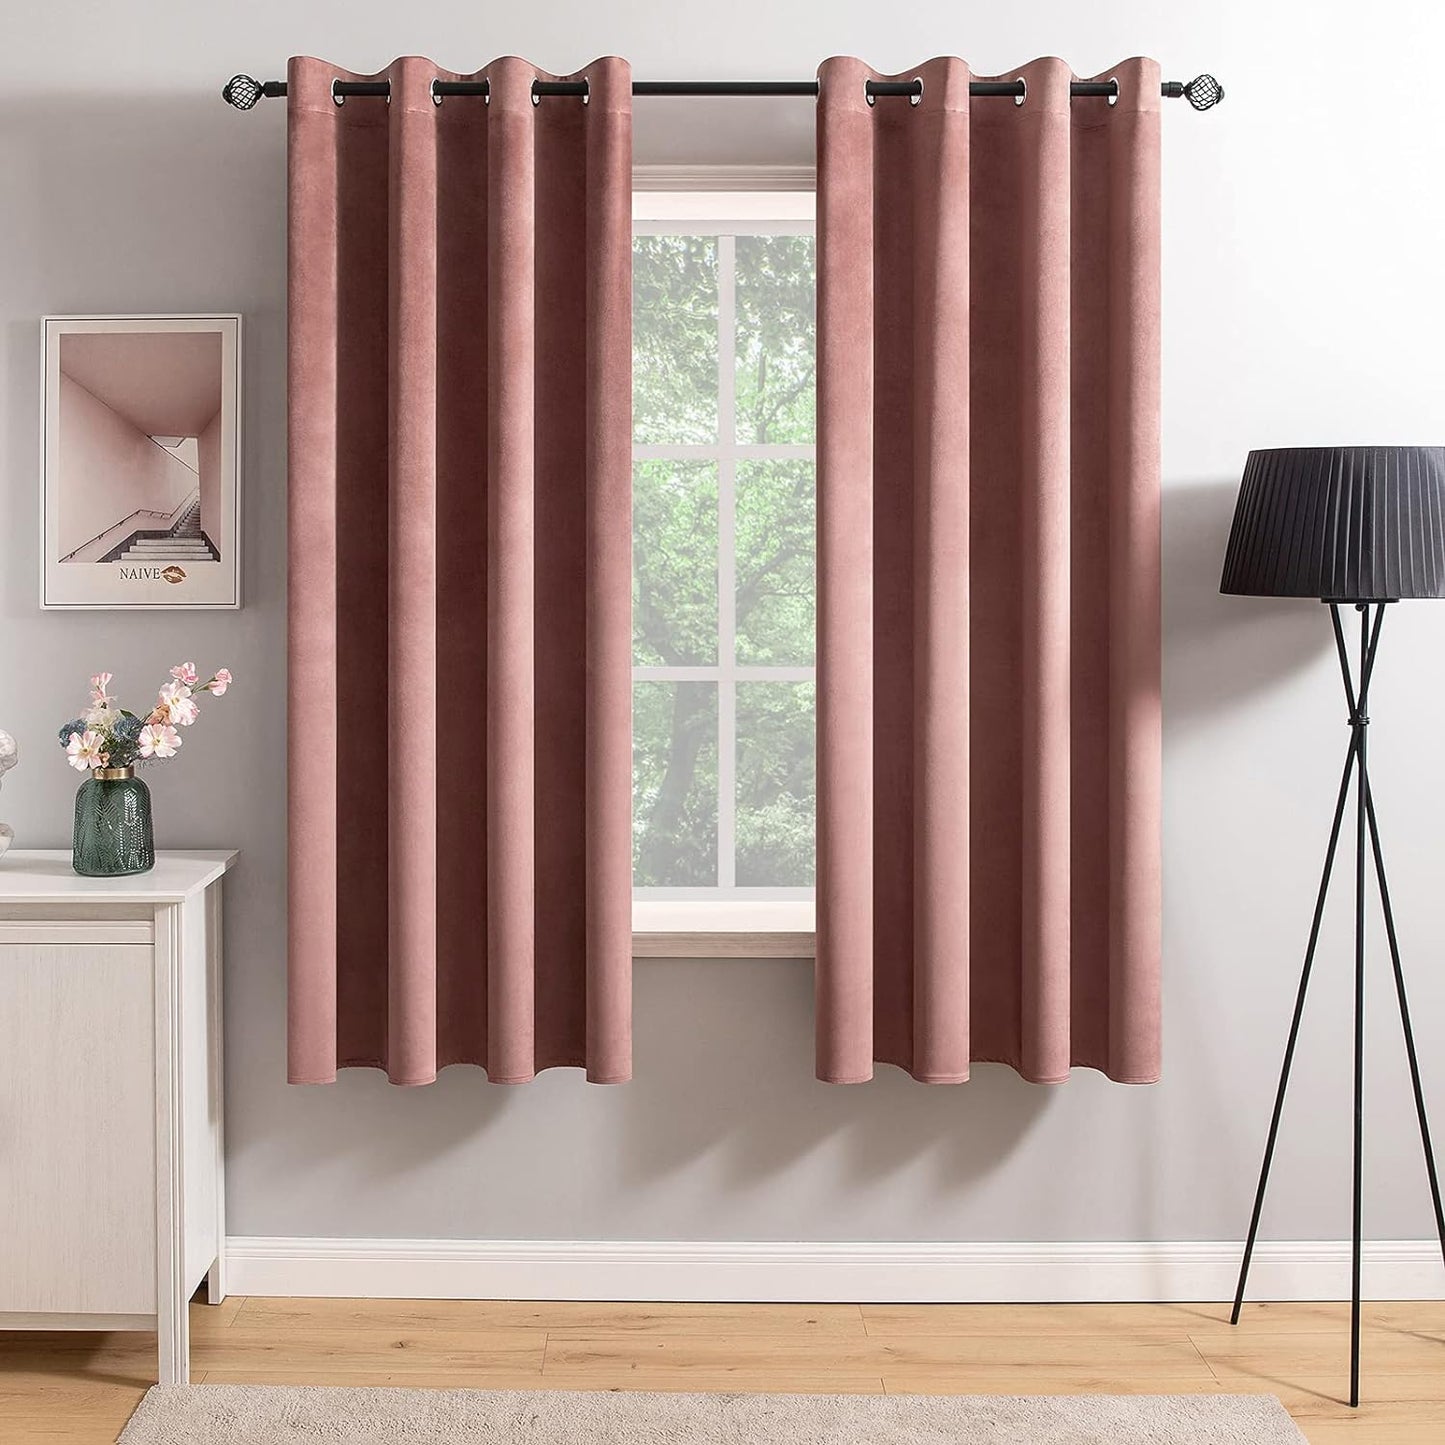 MIULEE Velvet Curtains Olive Green Elegant Grommet Curtains Thermal Insulated Soundproof Room Darkening Curtains/Drapes for Classical Living Room Bedroom Decor 52 X 84 Inch Set of 2  MIULEE Dusty Rose W52 X L63 